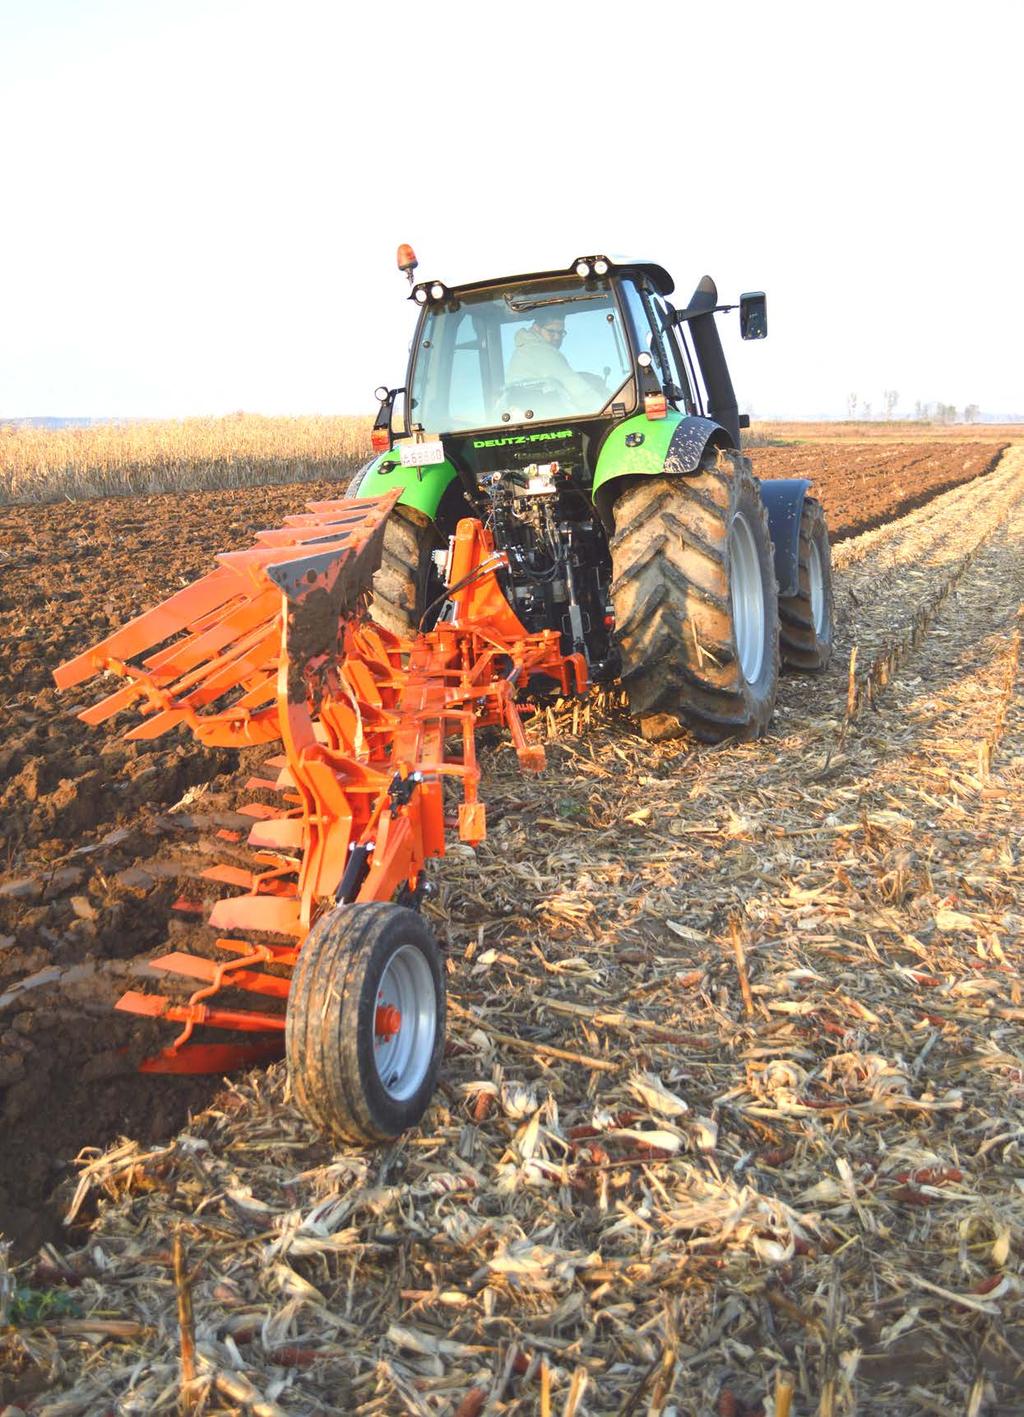 KK 2000 The reversible ploughs KK2000 are lightweight constructed and reliable option because they are suitable and adaptable to medium horsepower tractors.